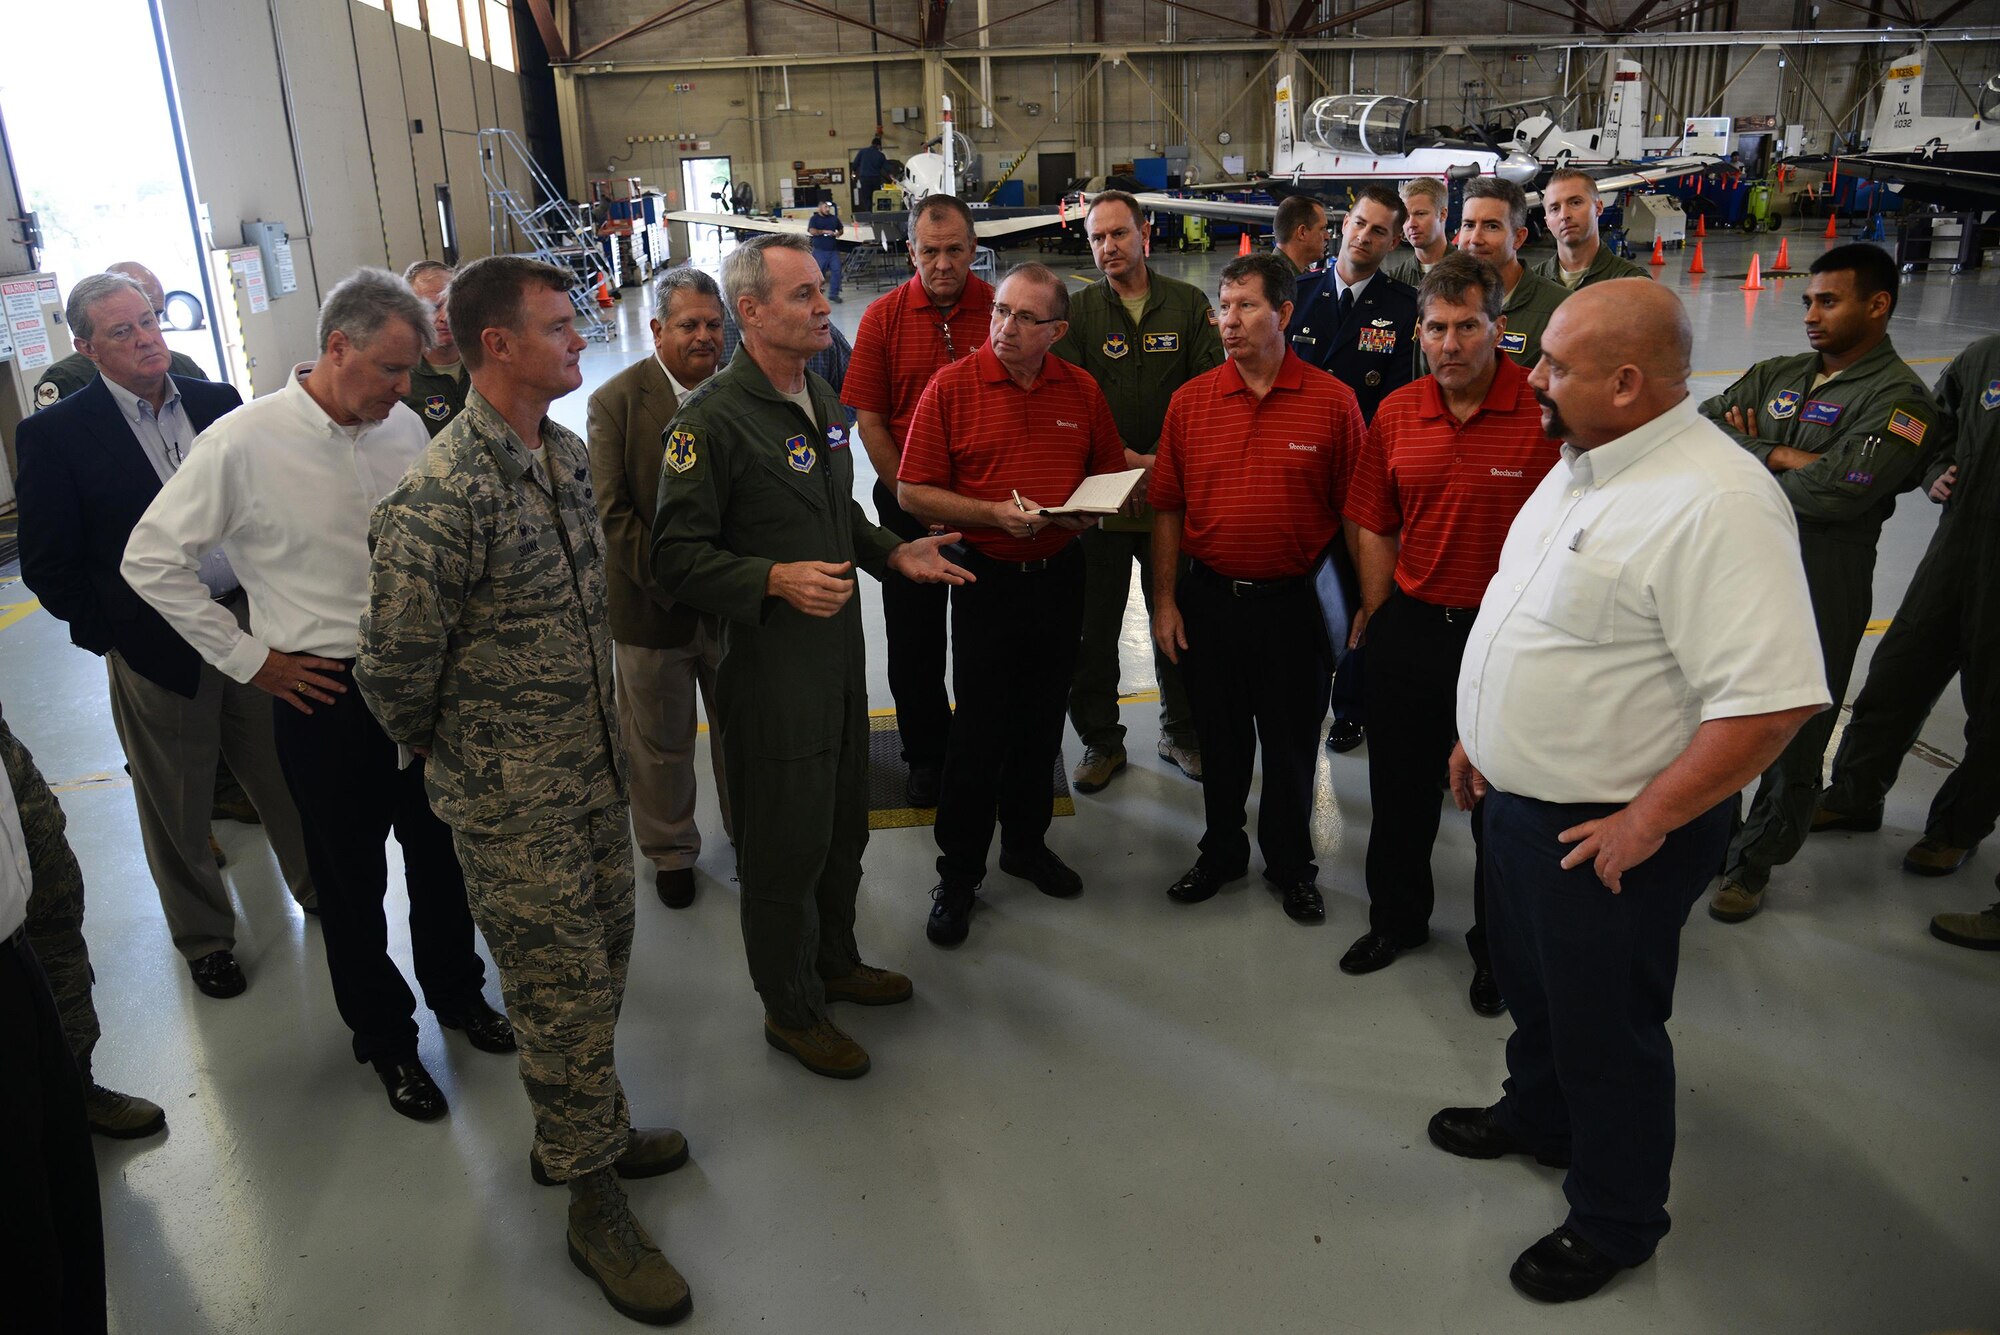 Lt. Gen. Darryl Roberson, commander of Air Education and Training Command, speaks to team members and defense contractors at Laughlin Air Force Base, Texas, Nov. 16, 2015. While at Laughlin, Roberson toured the T-6A Texan II hangar to discuss and observe maintenance operations. (U.S. Air Force photo by Airman 1st Class Ariel D. Partlow)